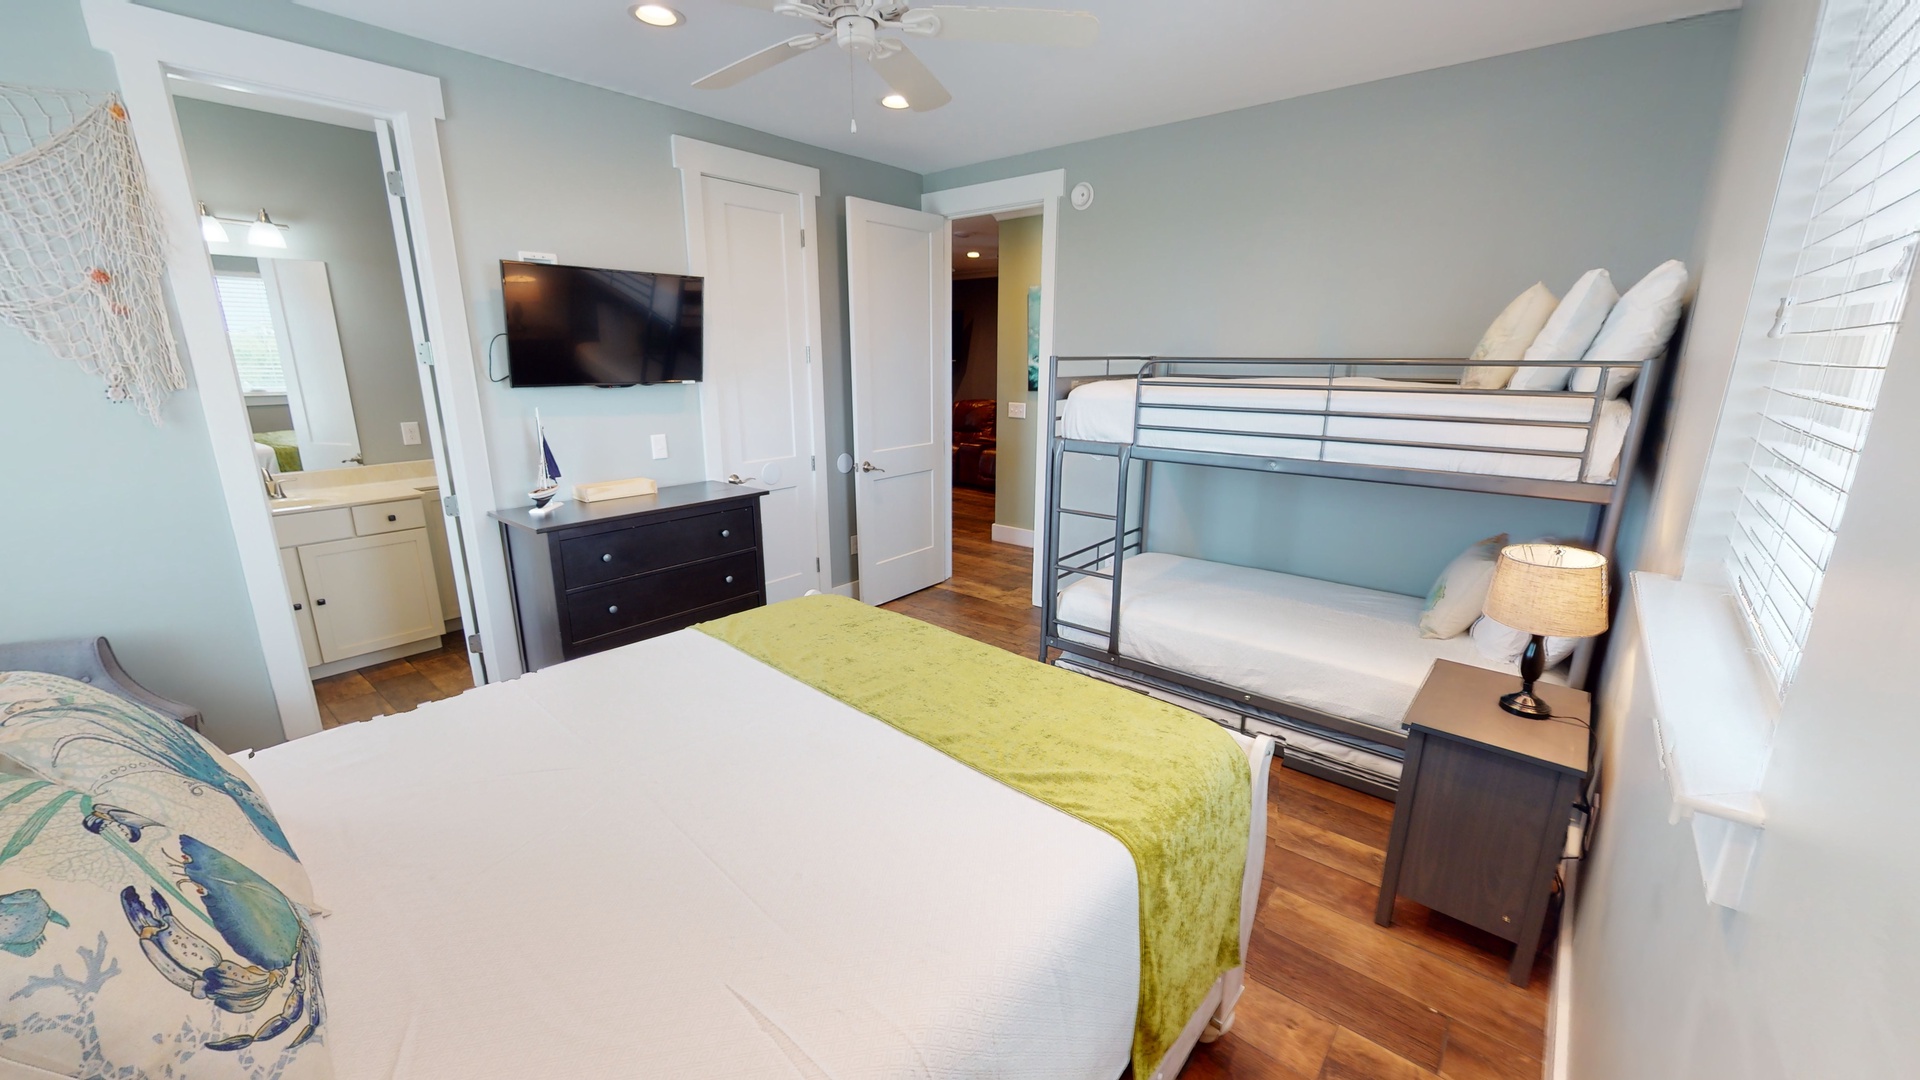 Bedroom 3 comes with a queen bed, twin bunk bed with a twin pull-out trundle, TV and a private bathroom